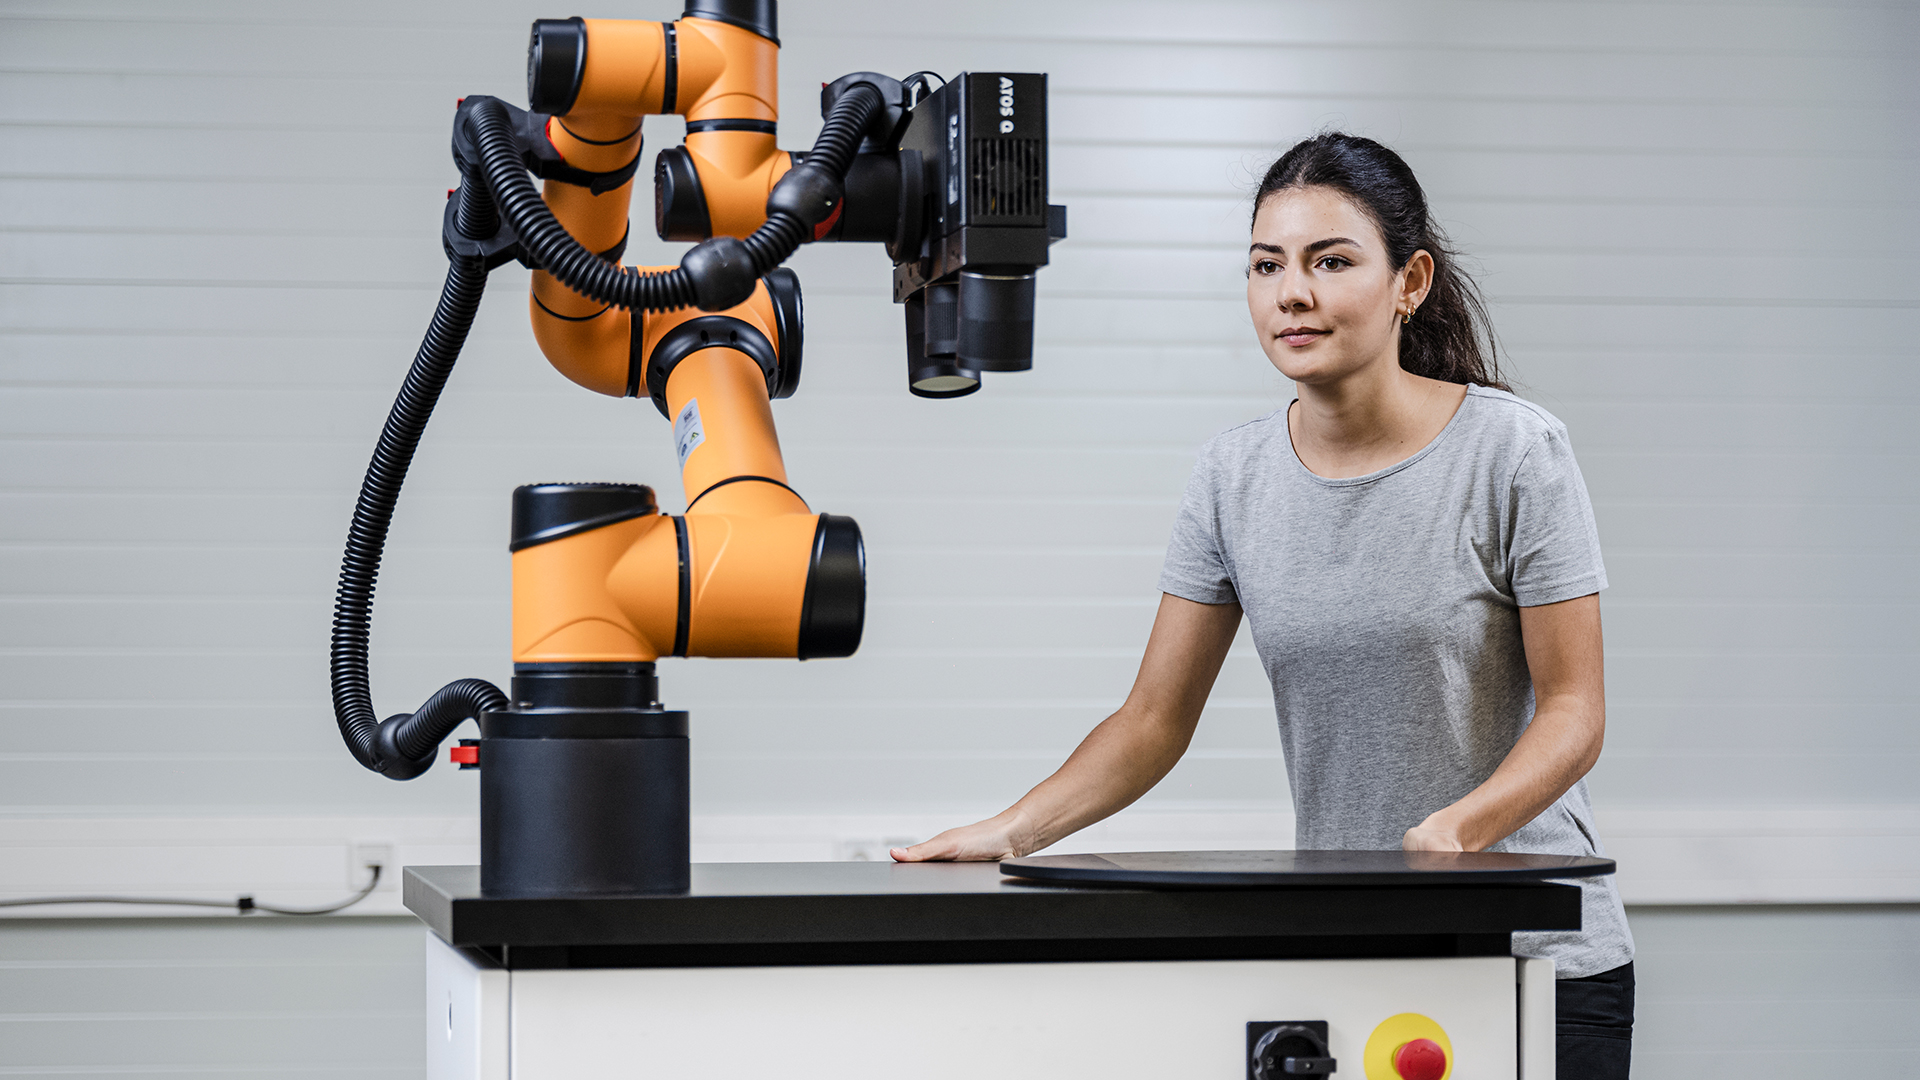 ZEISS ScanCobot moved by woman